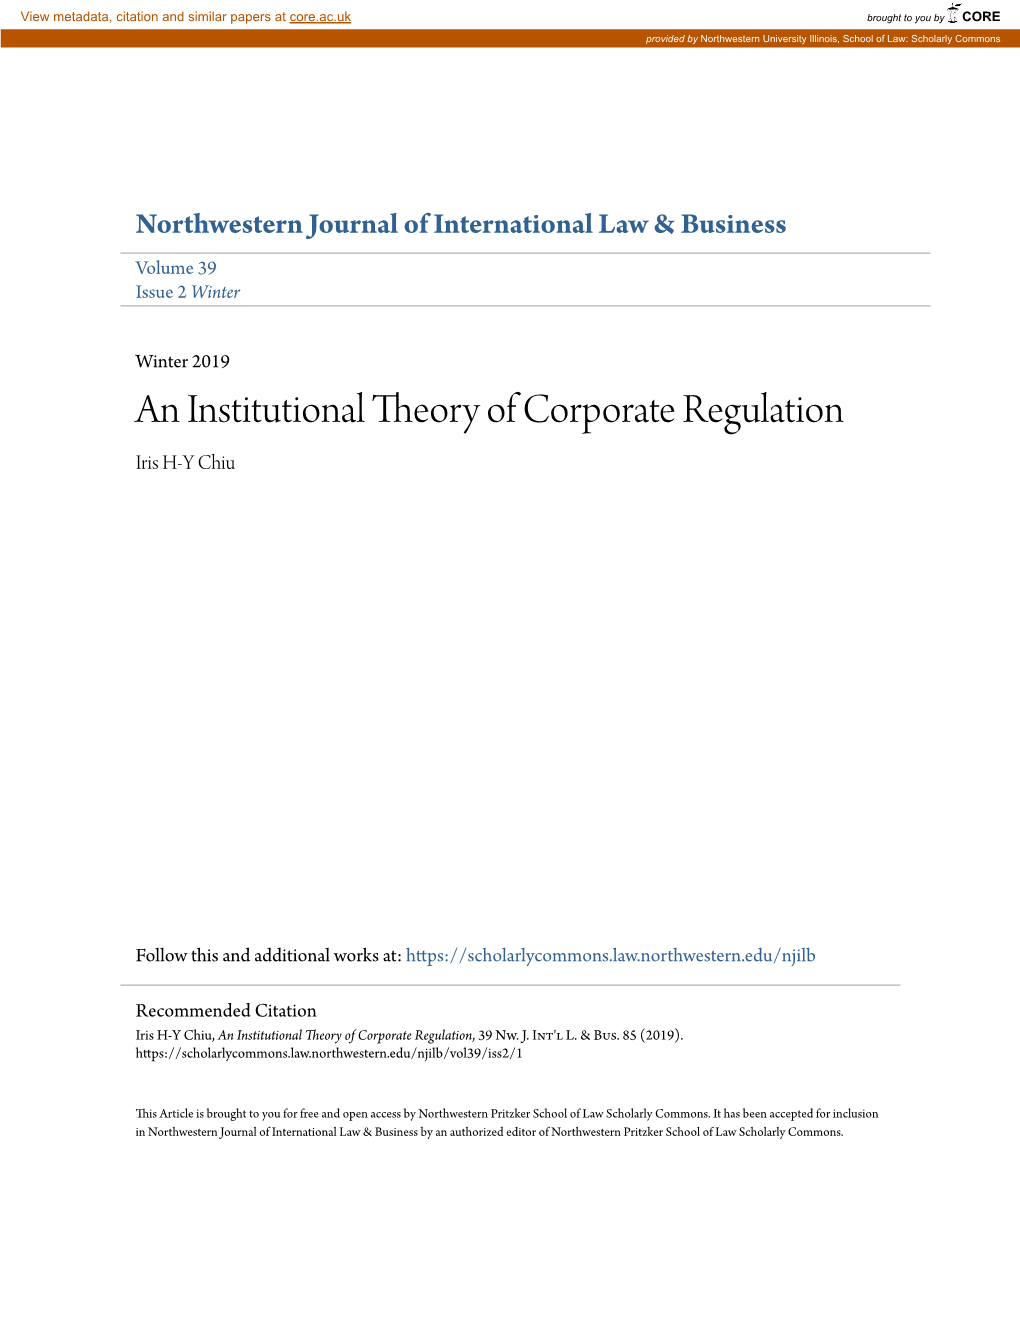 An Institutional Theory of Corporate Regulation Iris H-Y Chiu